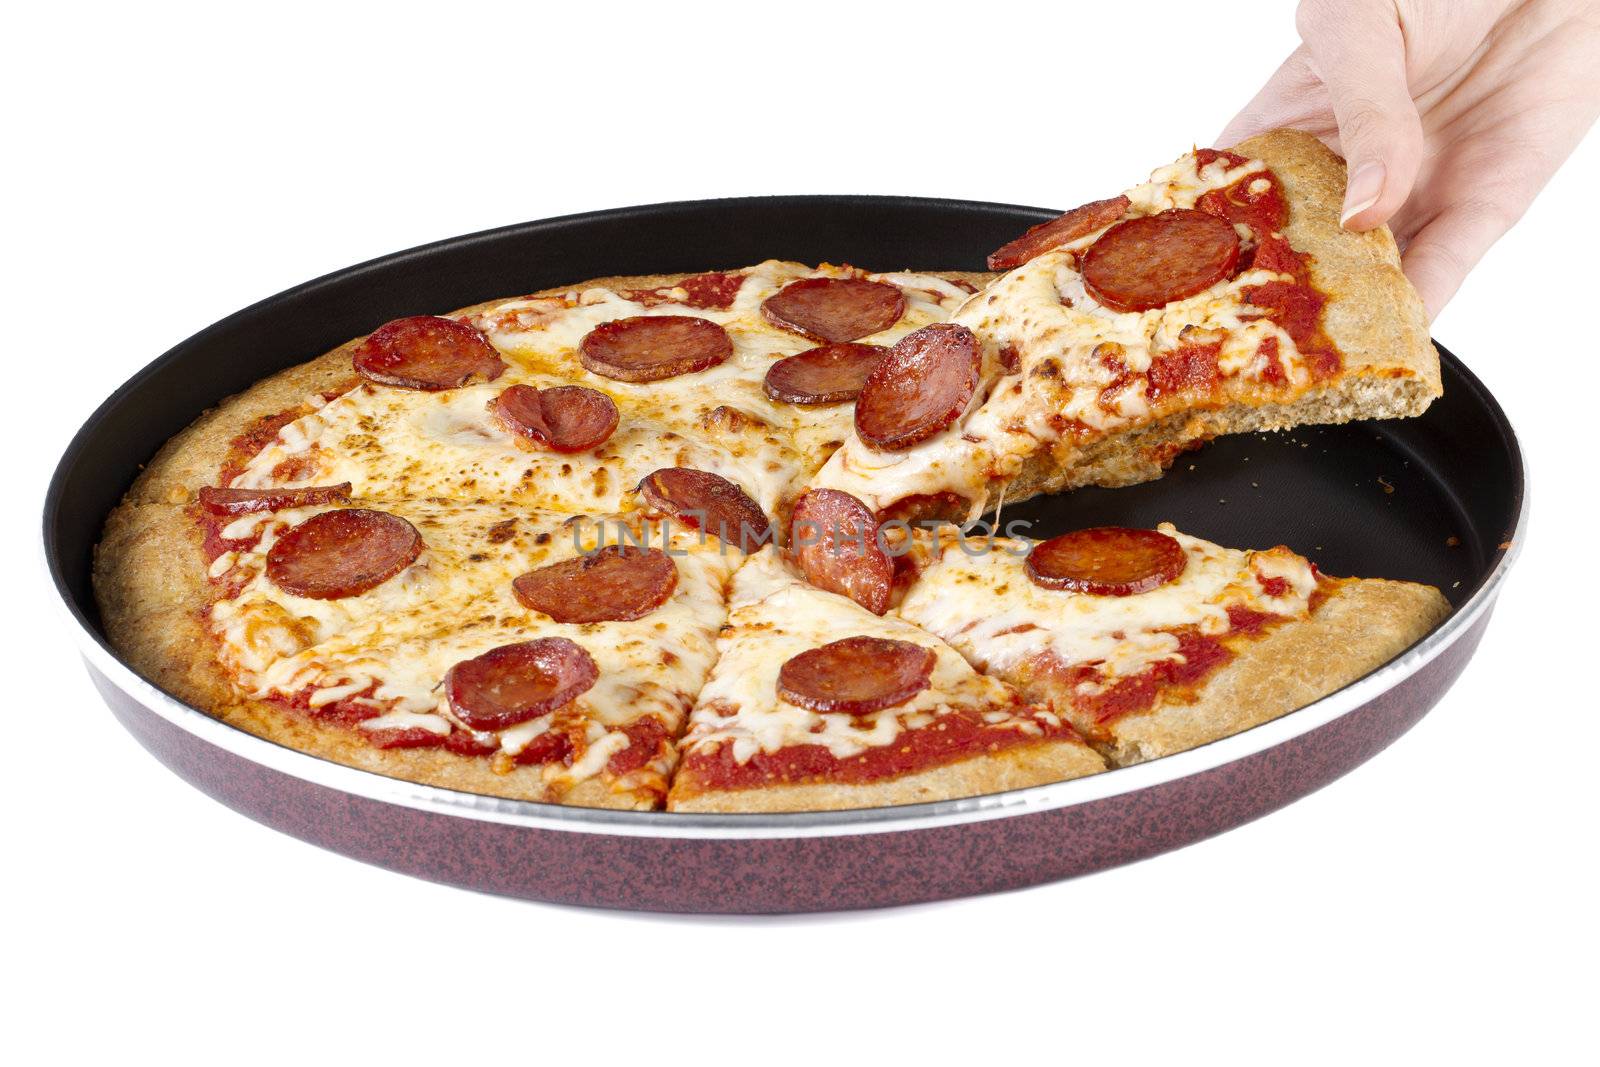 Pepperoni pizza on a tray against white background